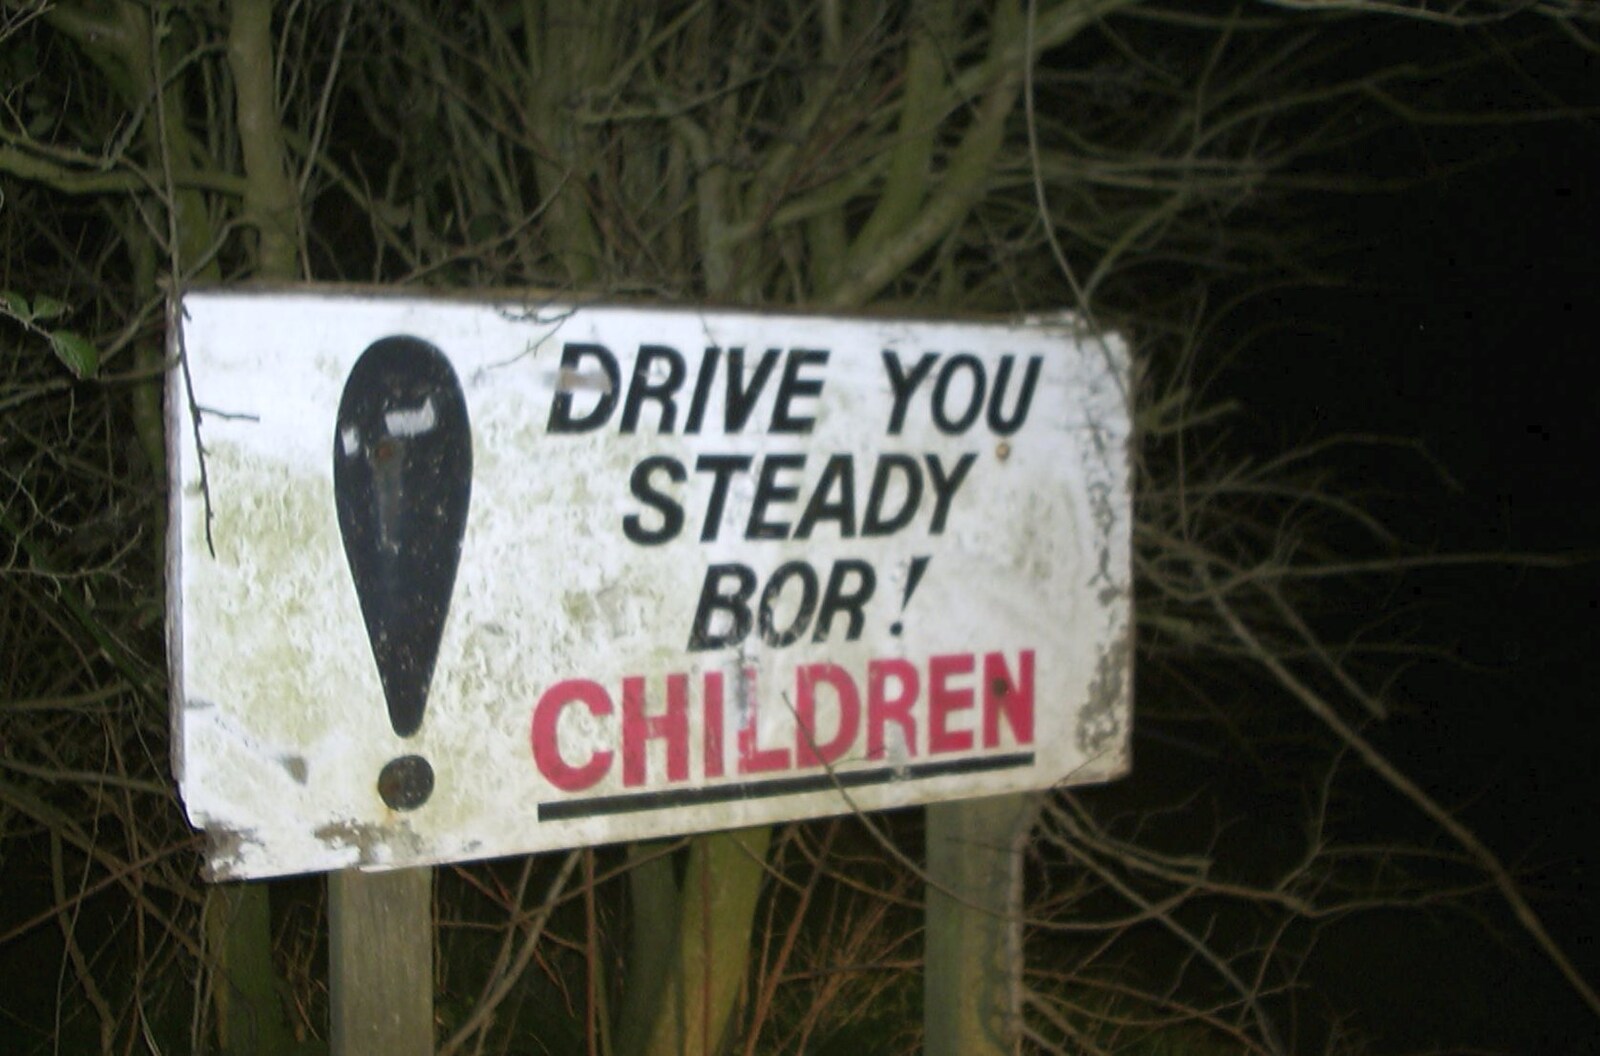 Carolyn on Sunday, Wymondham, Norfolk - 23rd March 2003: On the way back we spot this sign: 'Drive you steady bor!'